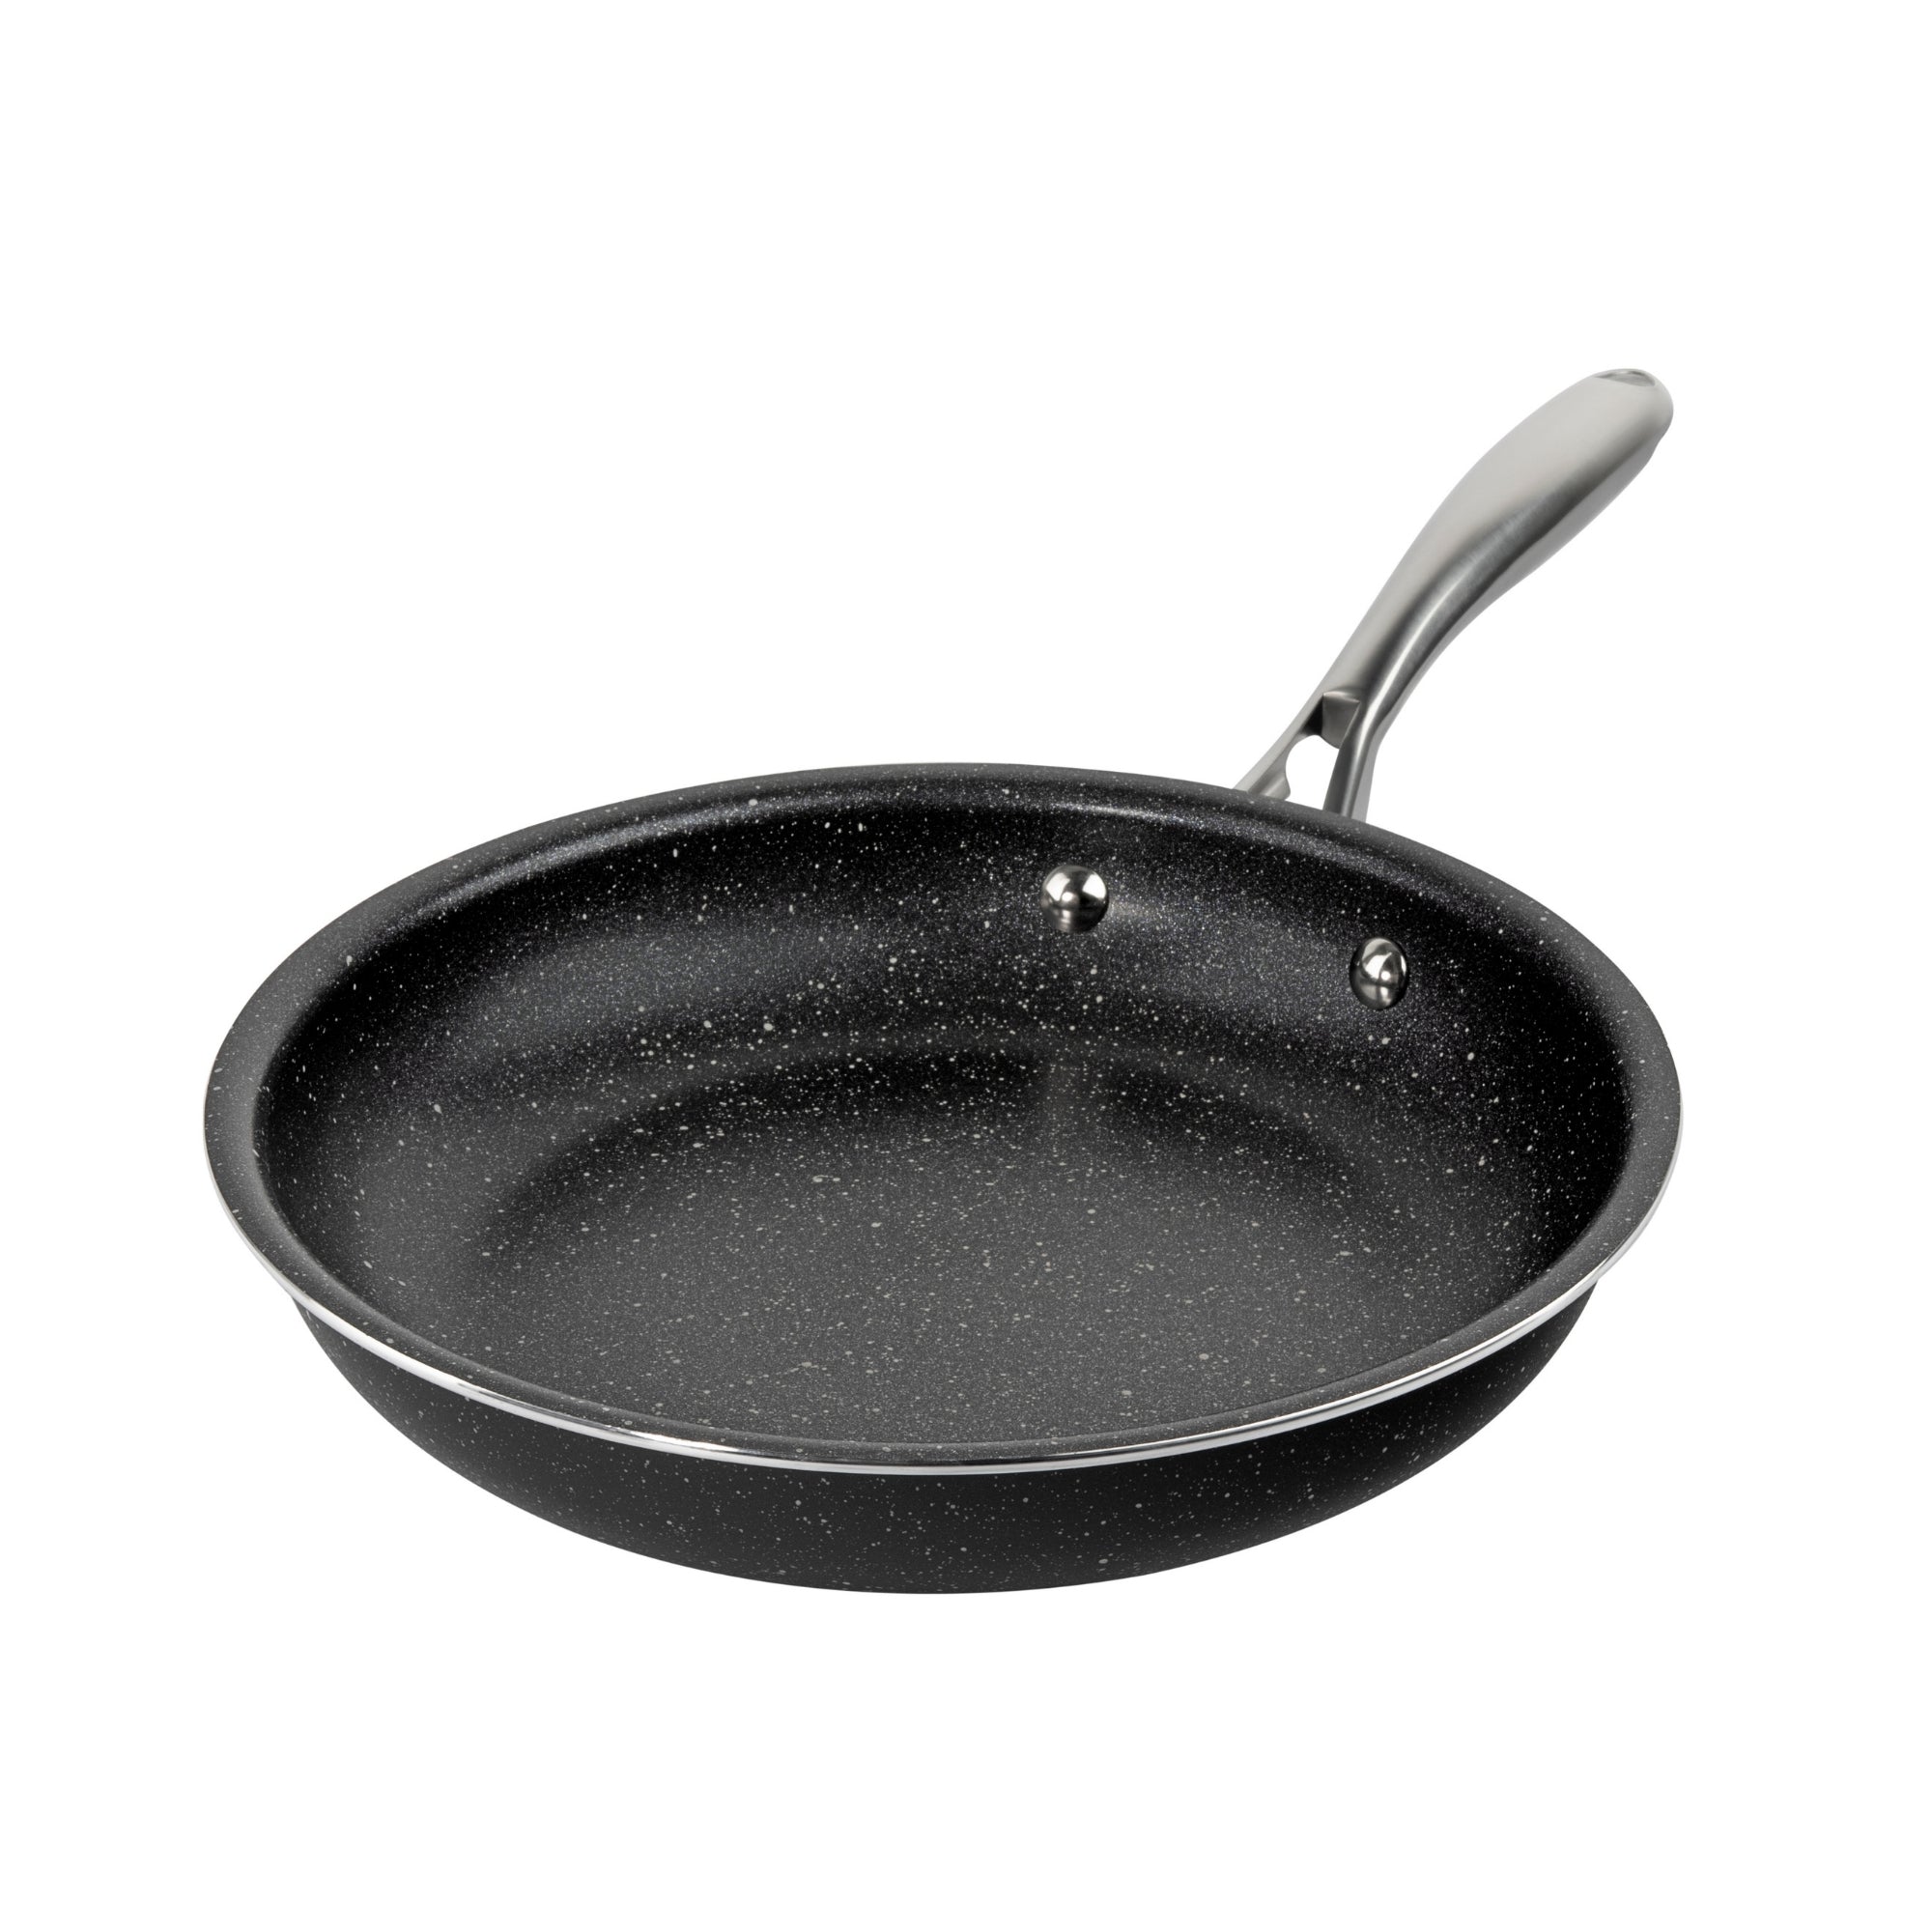 Rock Starfrit Pan Cookware Individual Replacement Non Stick Frying